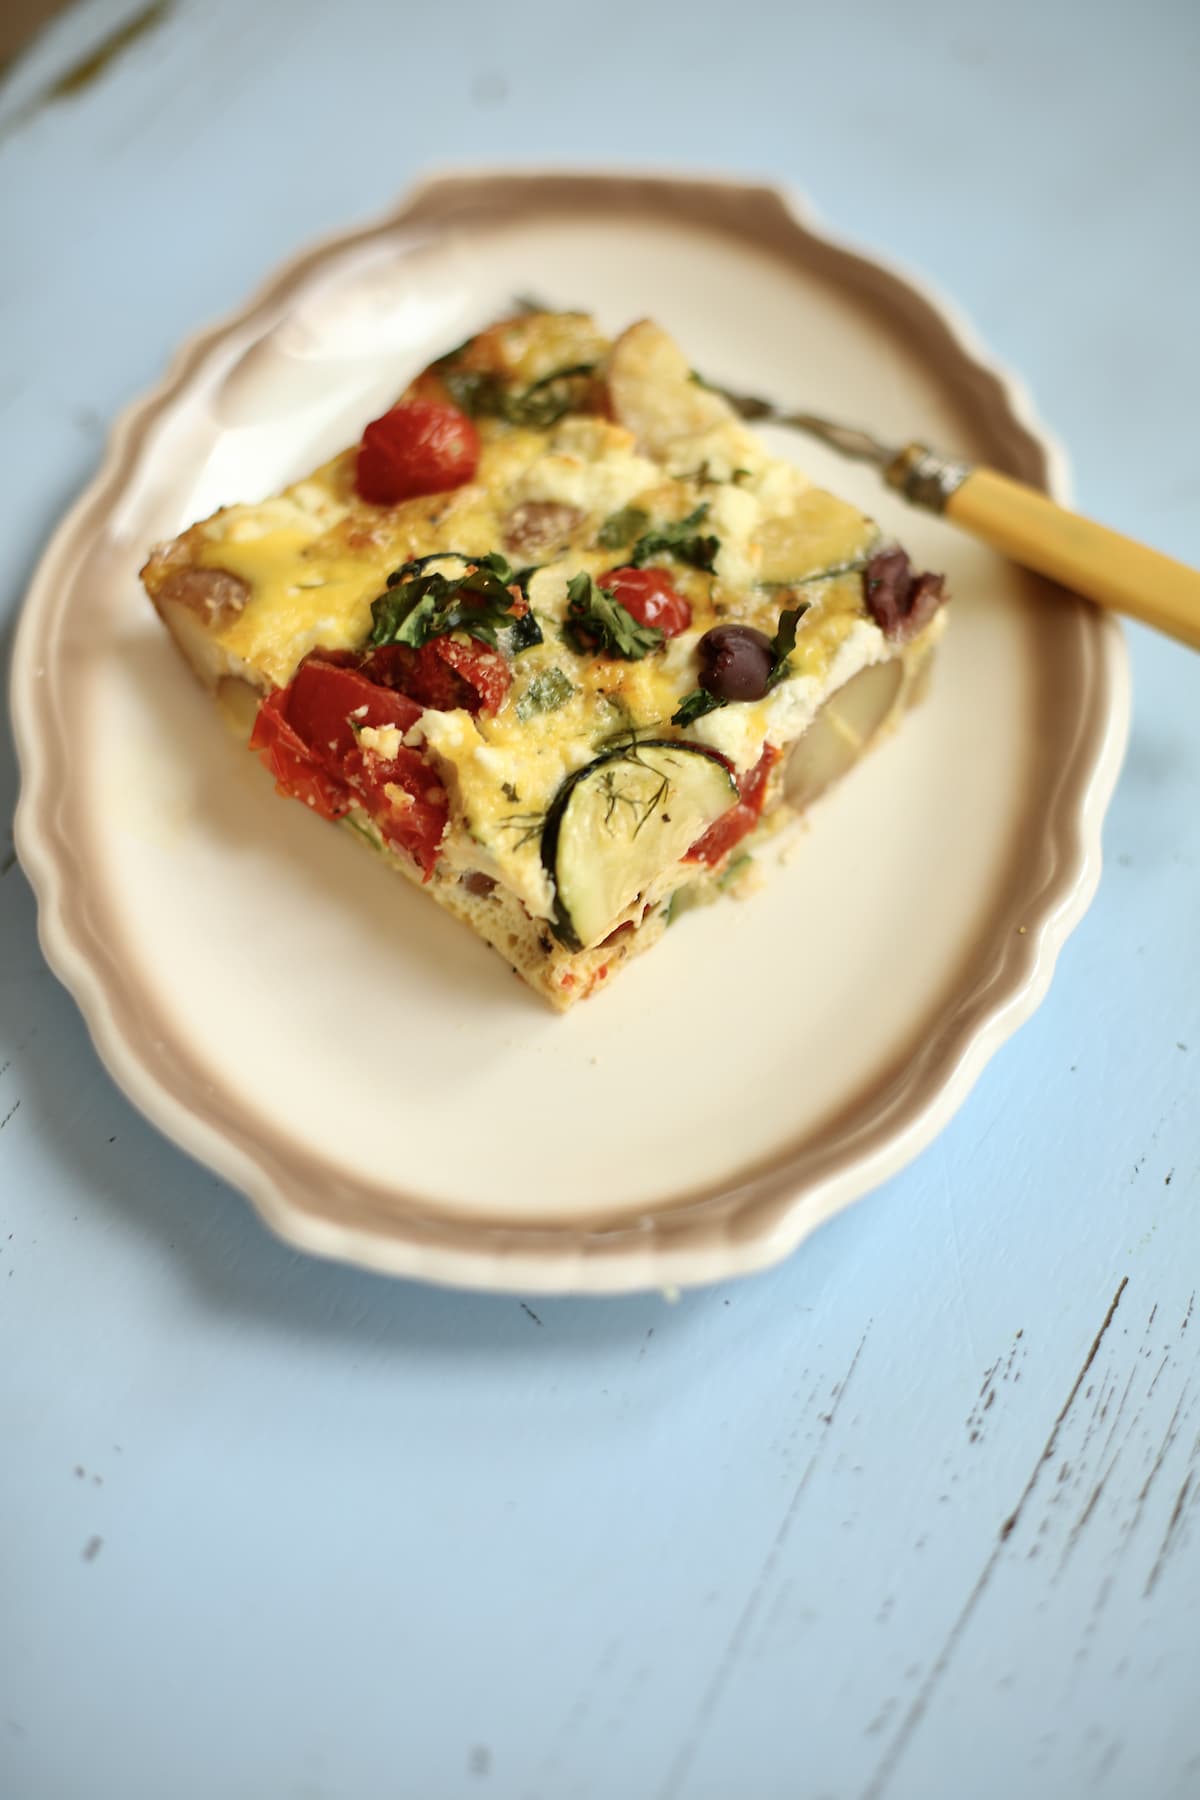 One slice of zucchini potato frittata on a white plate with beige trim, with a fork, sitting on a blue table.